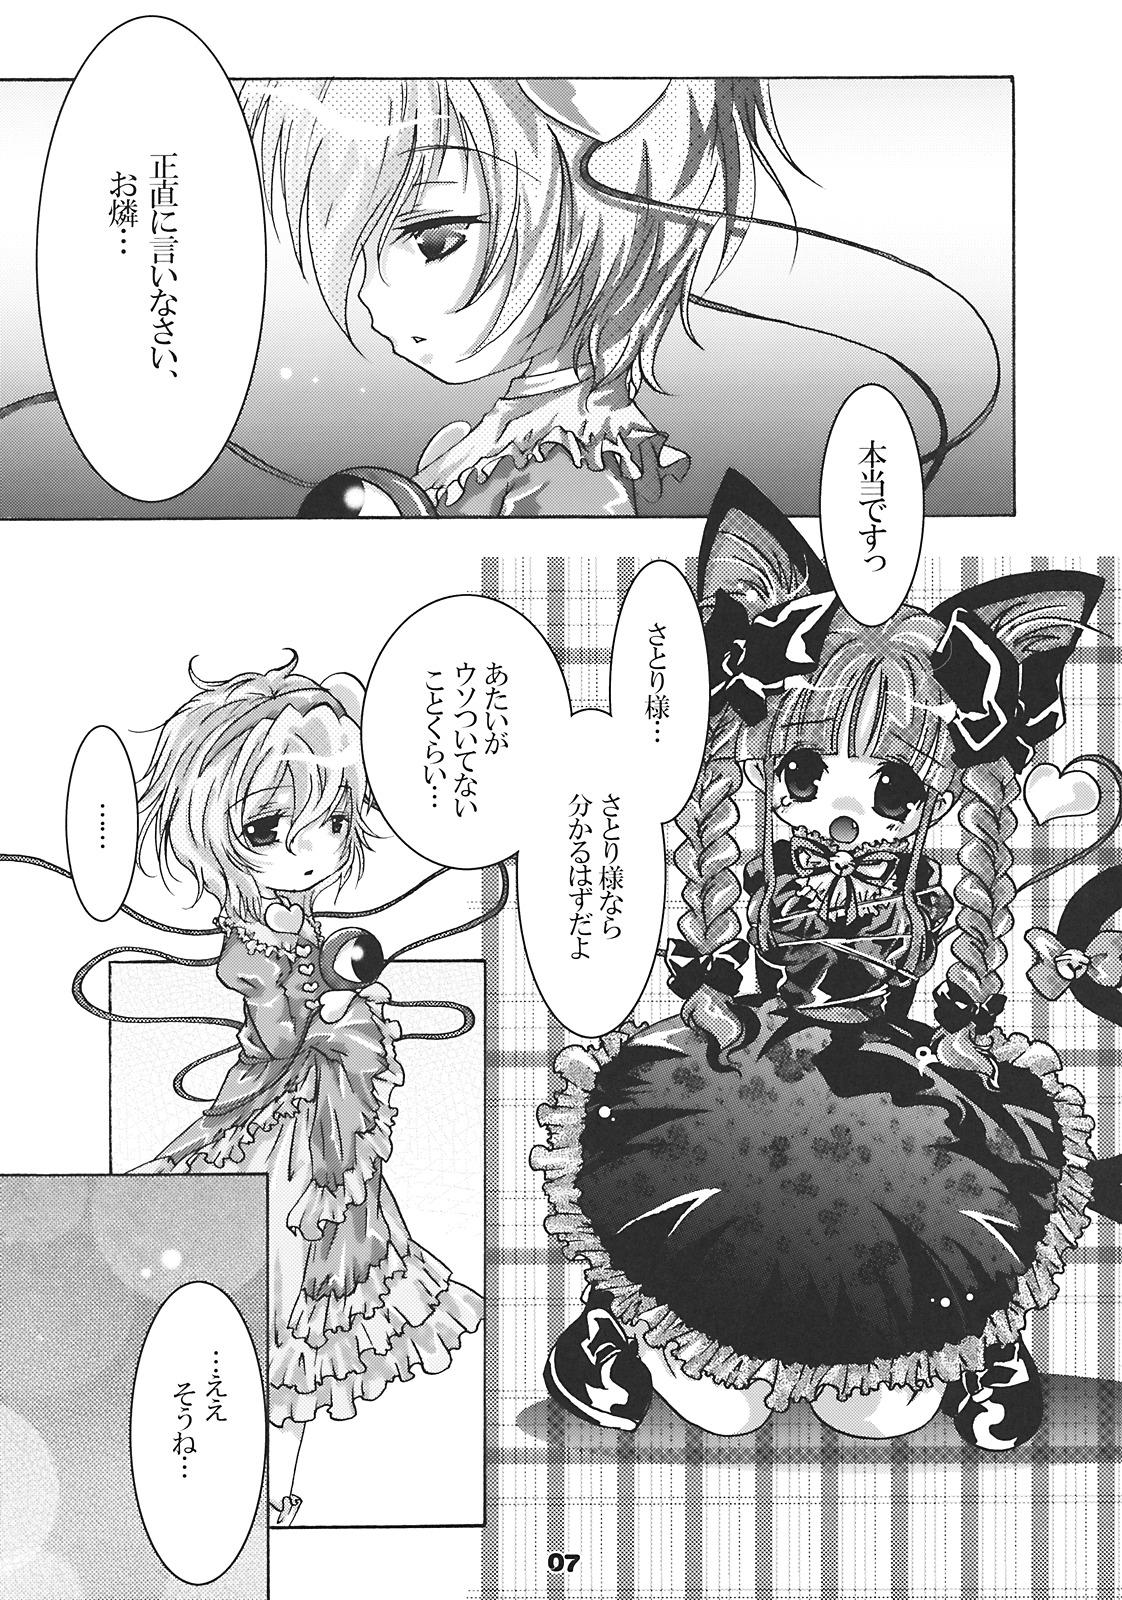 Mediumtits ねころまんさー - Touhou project Amateur Xxx - Page 7